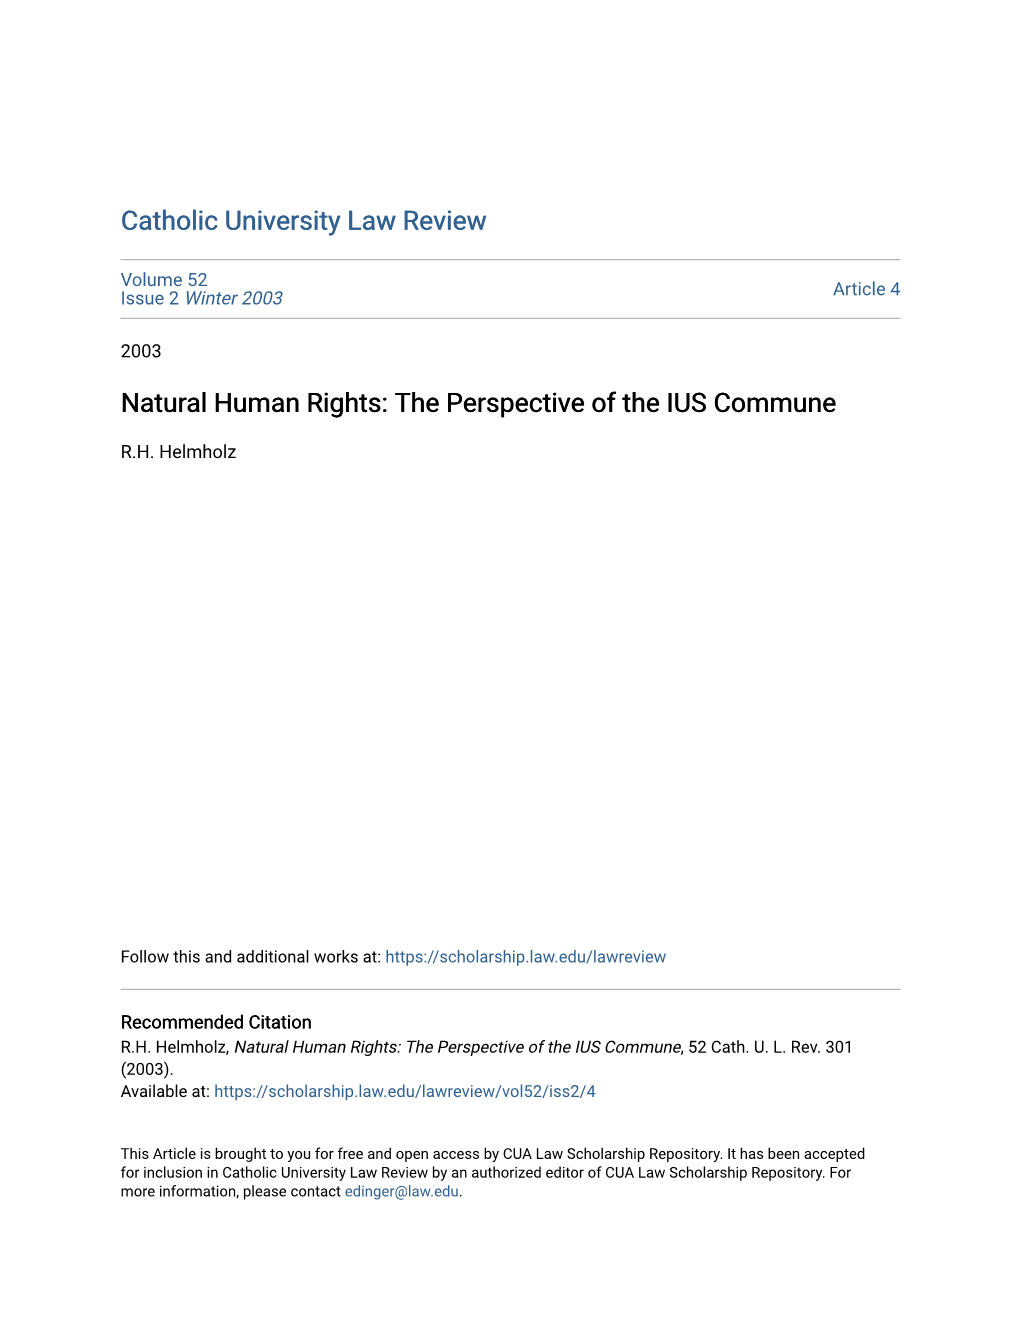 Natural Human Rights: the Perspective of the IUS Commune